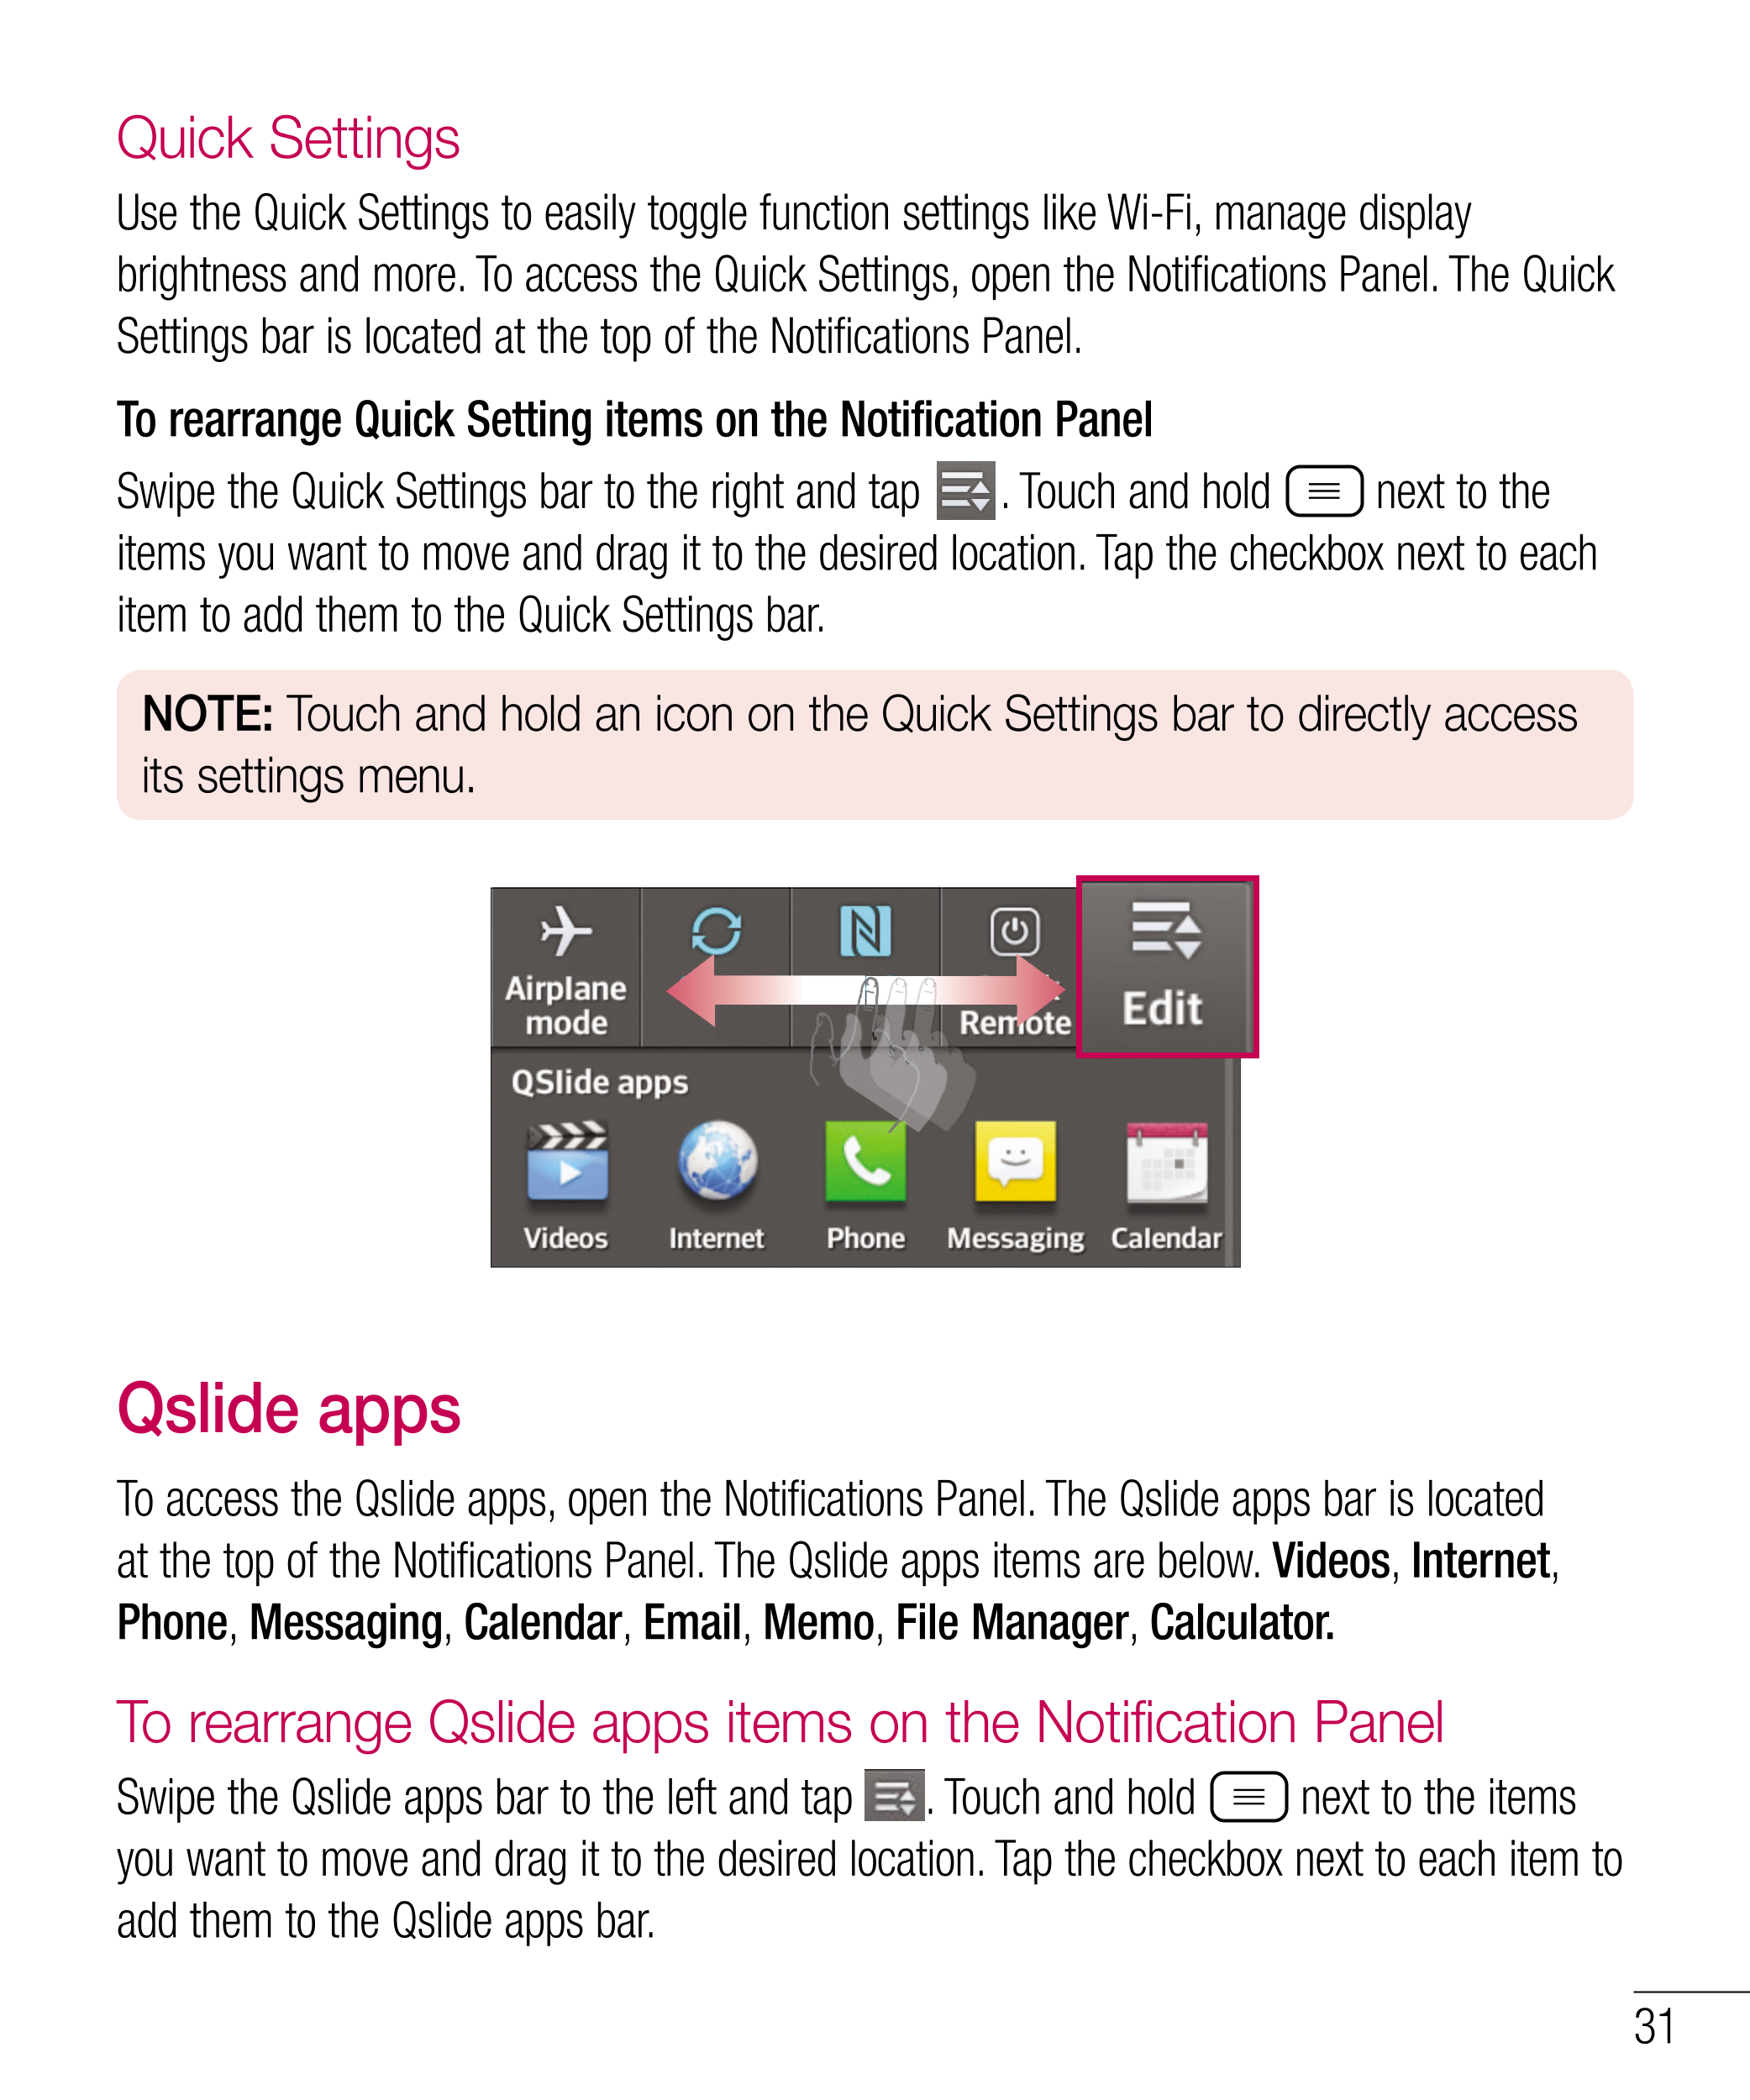 Quick Settings
Use the Quick Settings to easily toggle function settings like Wi-Fi, manage display 
brightness and more. To acc